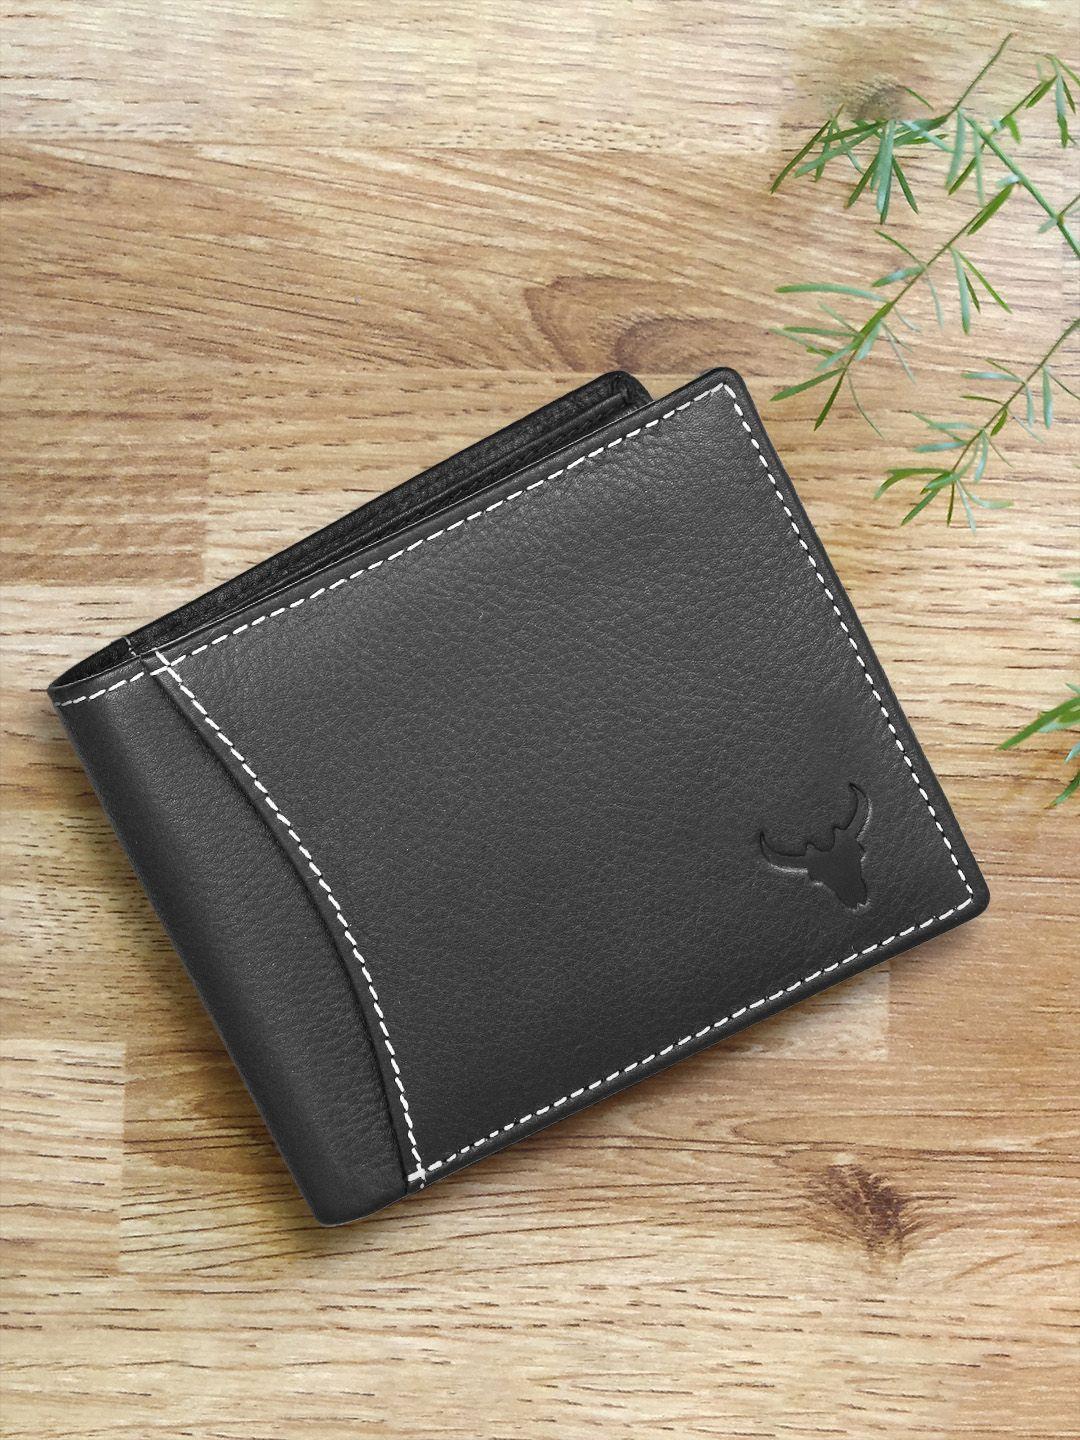 napa hide men black solid leather two fold wallet with rfid